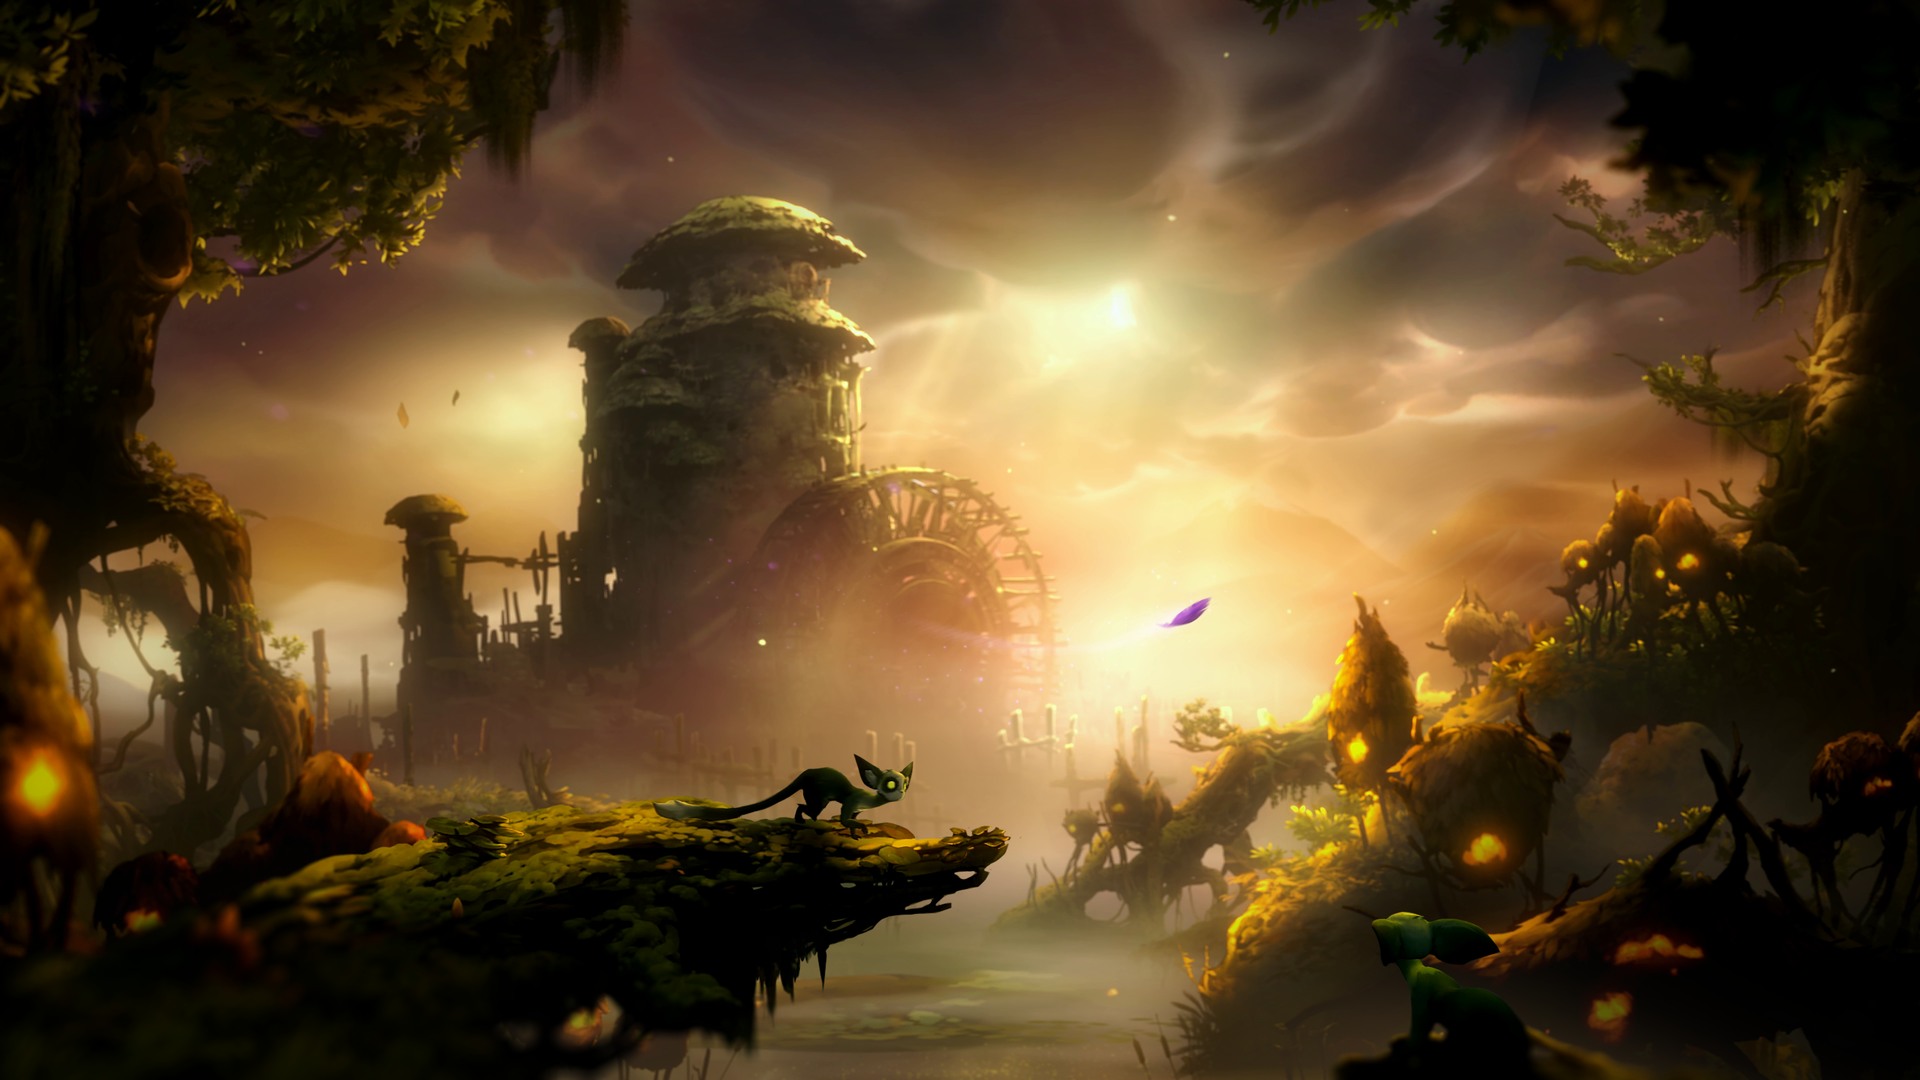 Mill in the magic forest Wallpaper from Ori and the Blind Forest